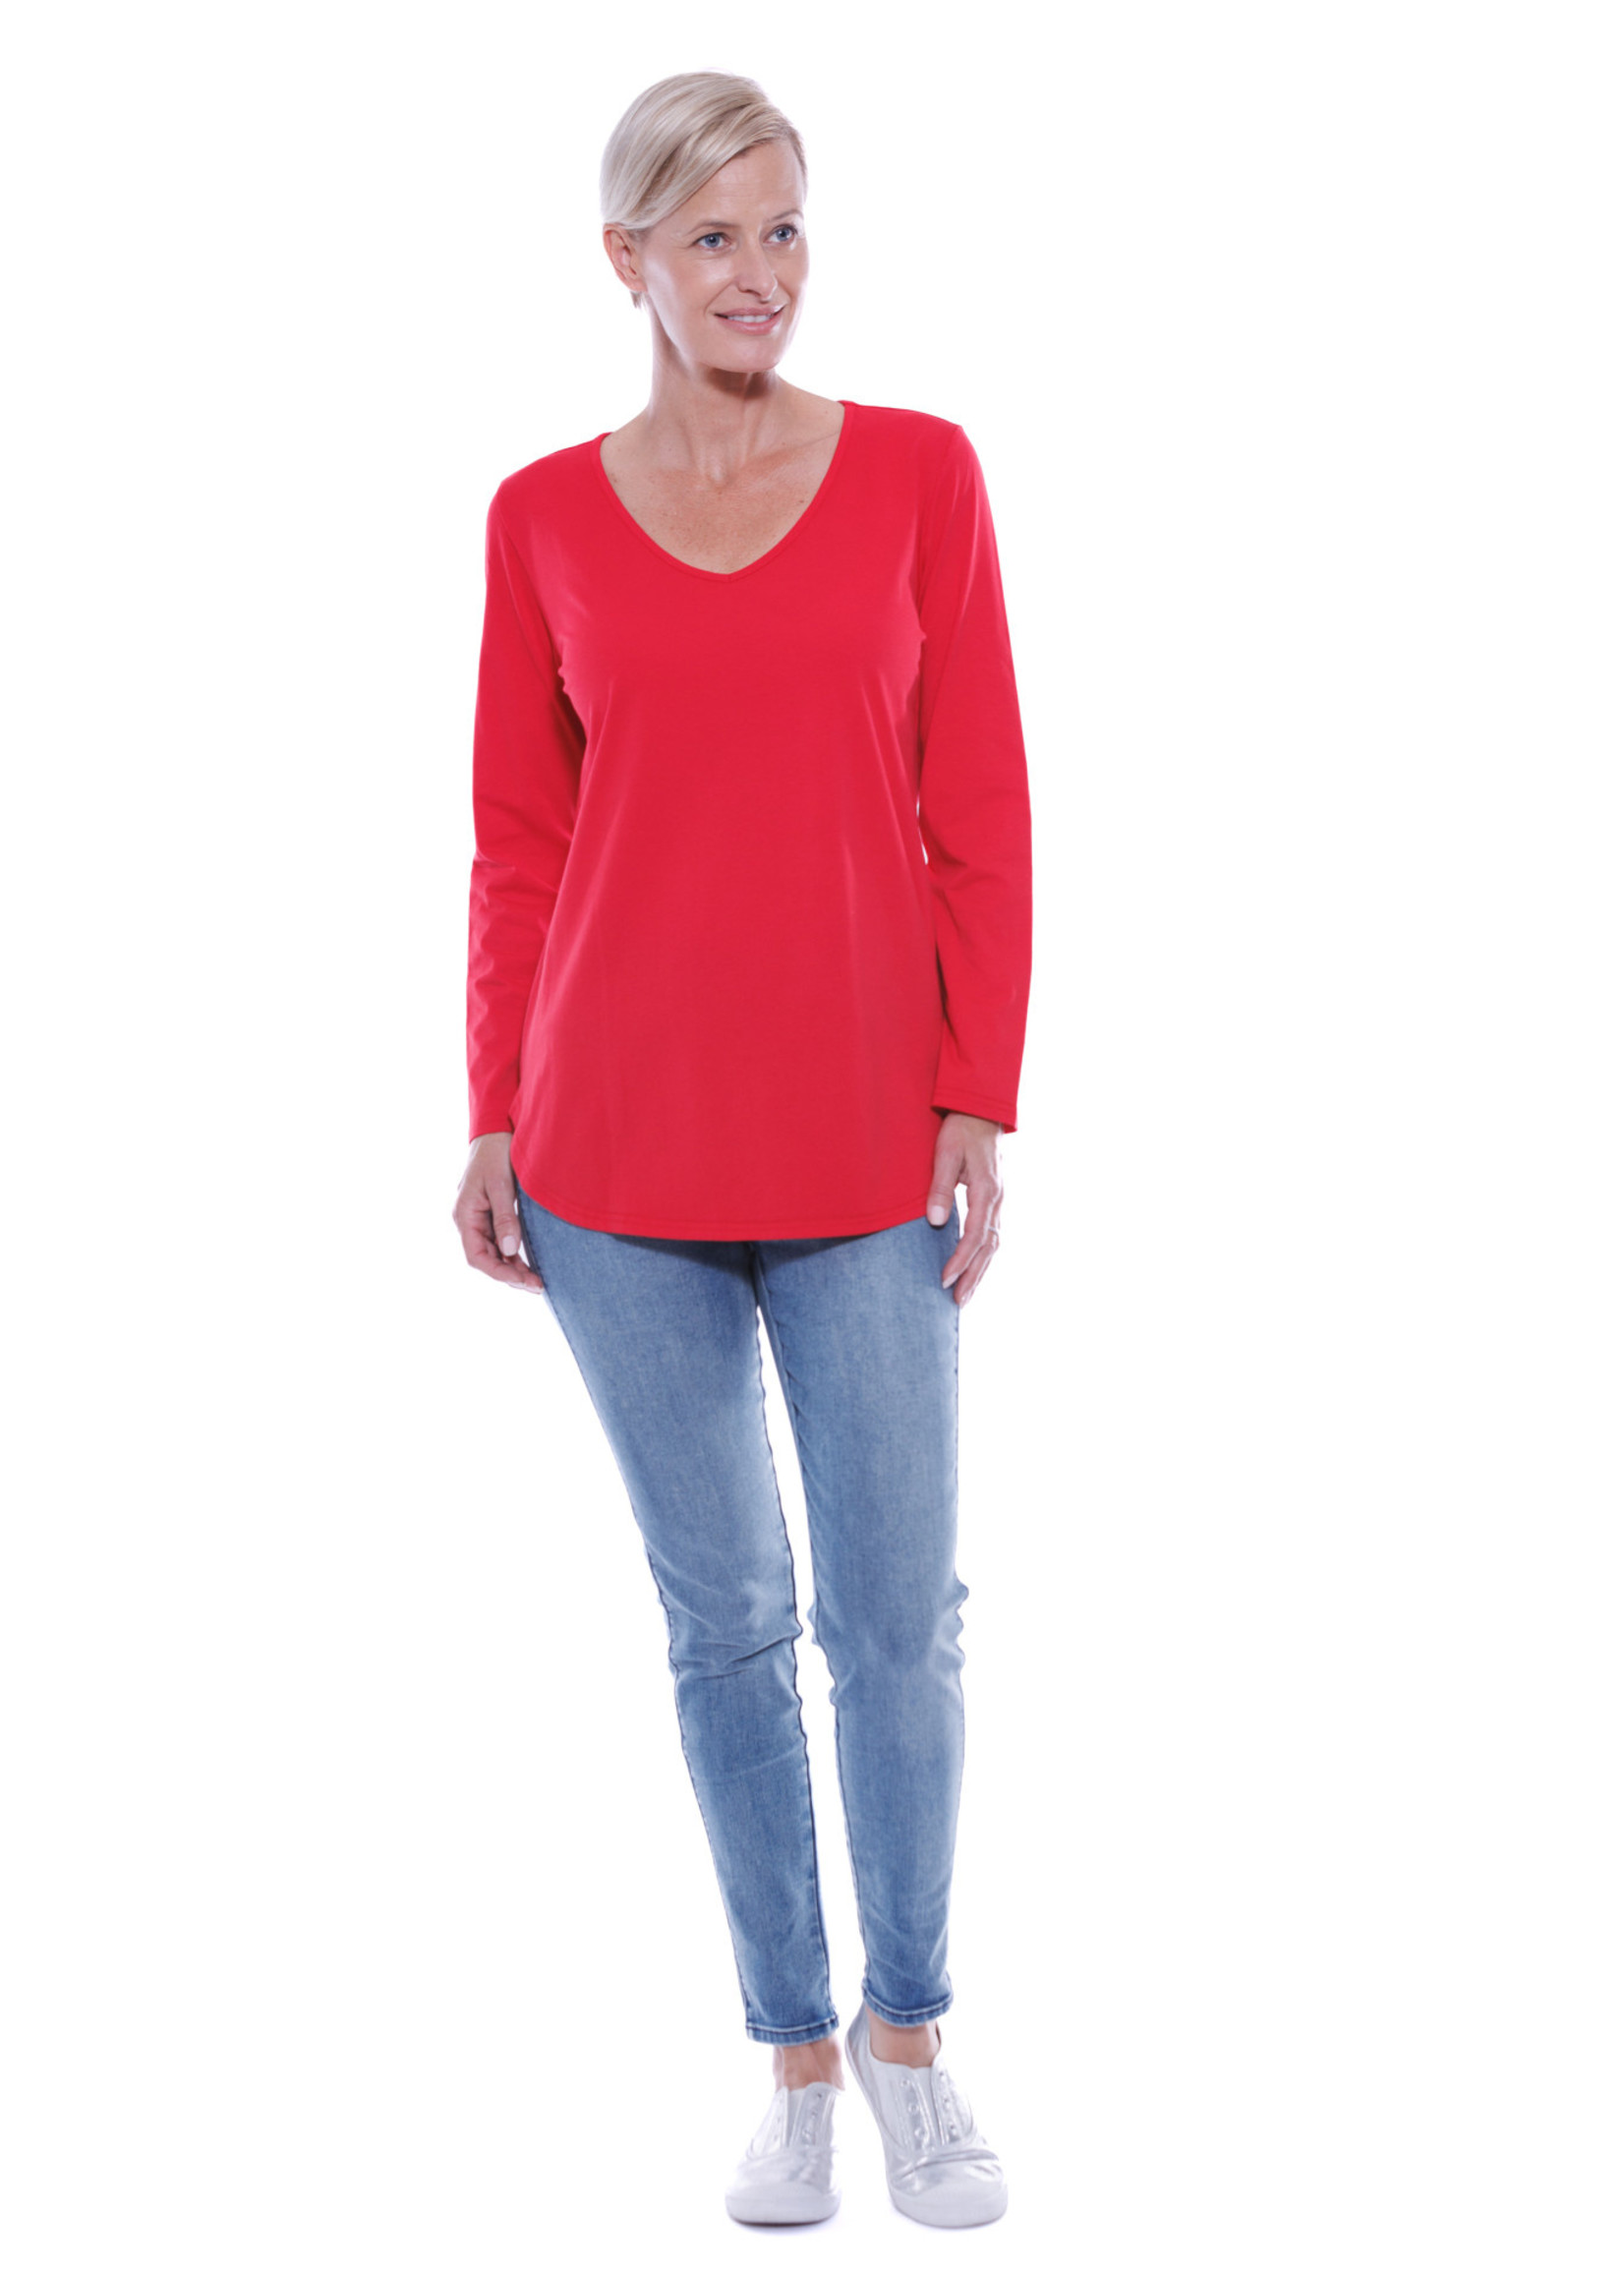 Cafe Latte Red Cotton Long Sleeve V-Neck Tee